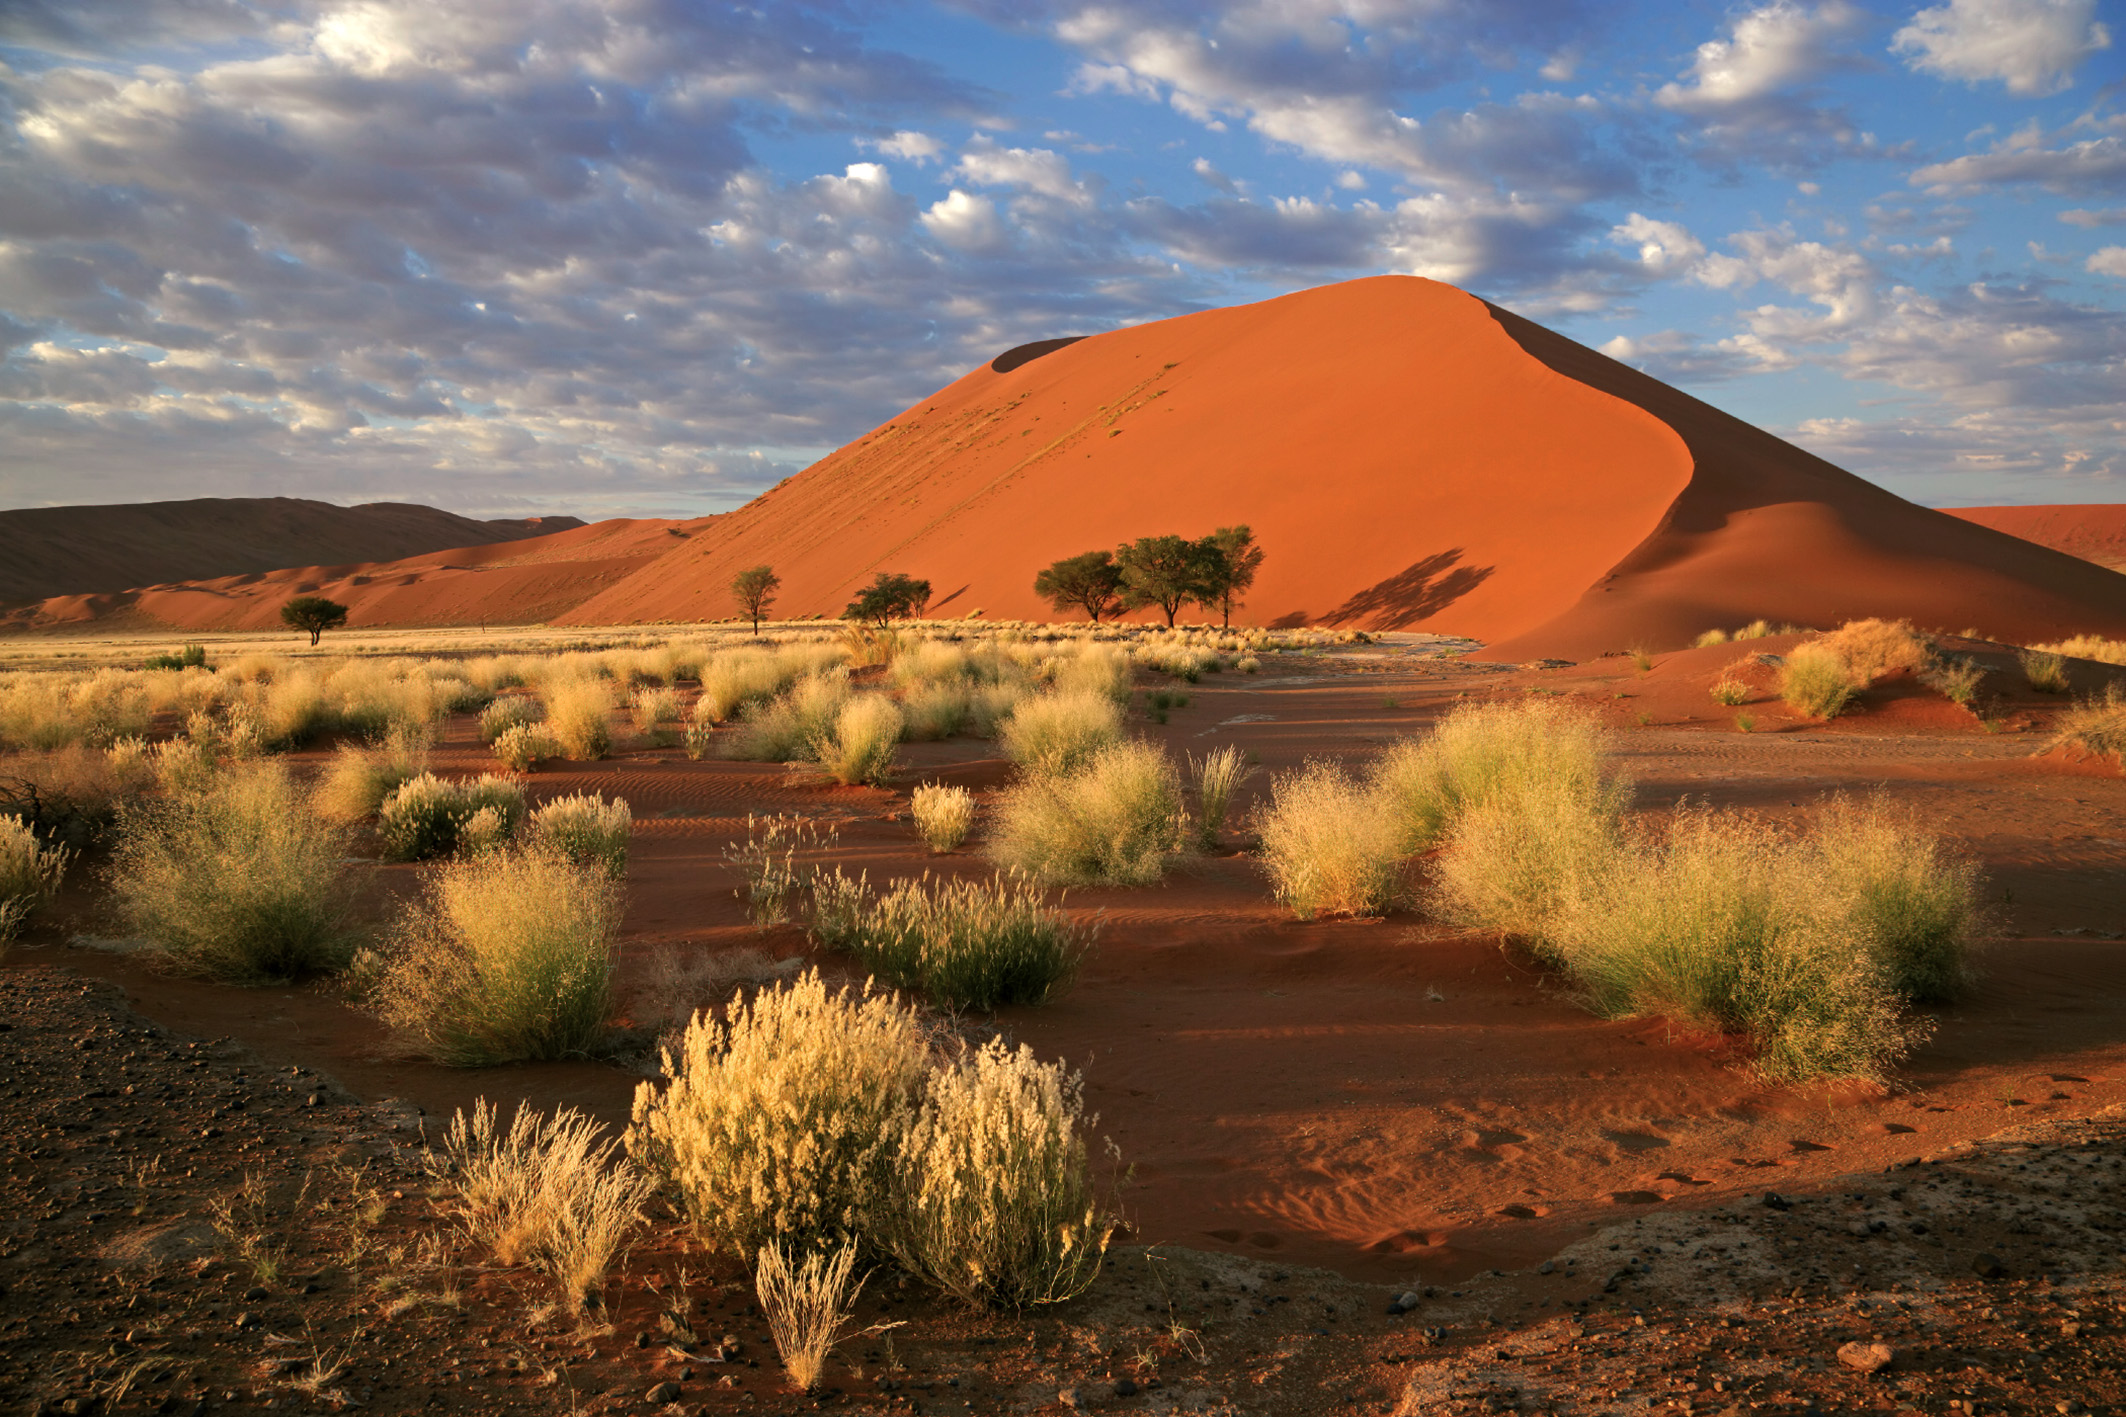 Landscape with desert grasses, large sand dune and sky with clouds, Sossusvlei, Namibia, southern Africa